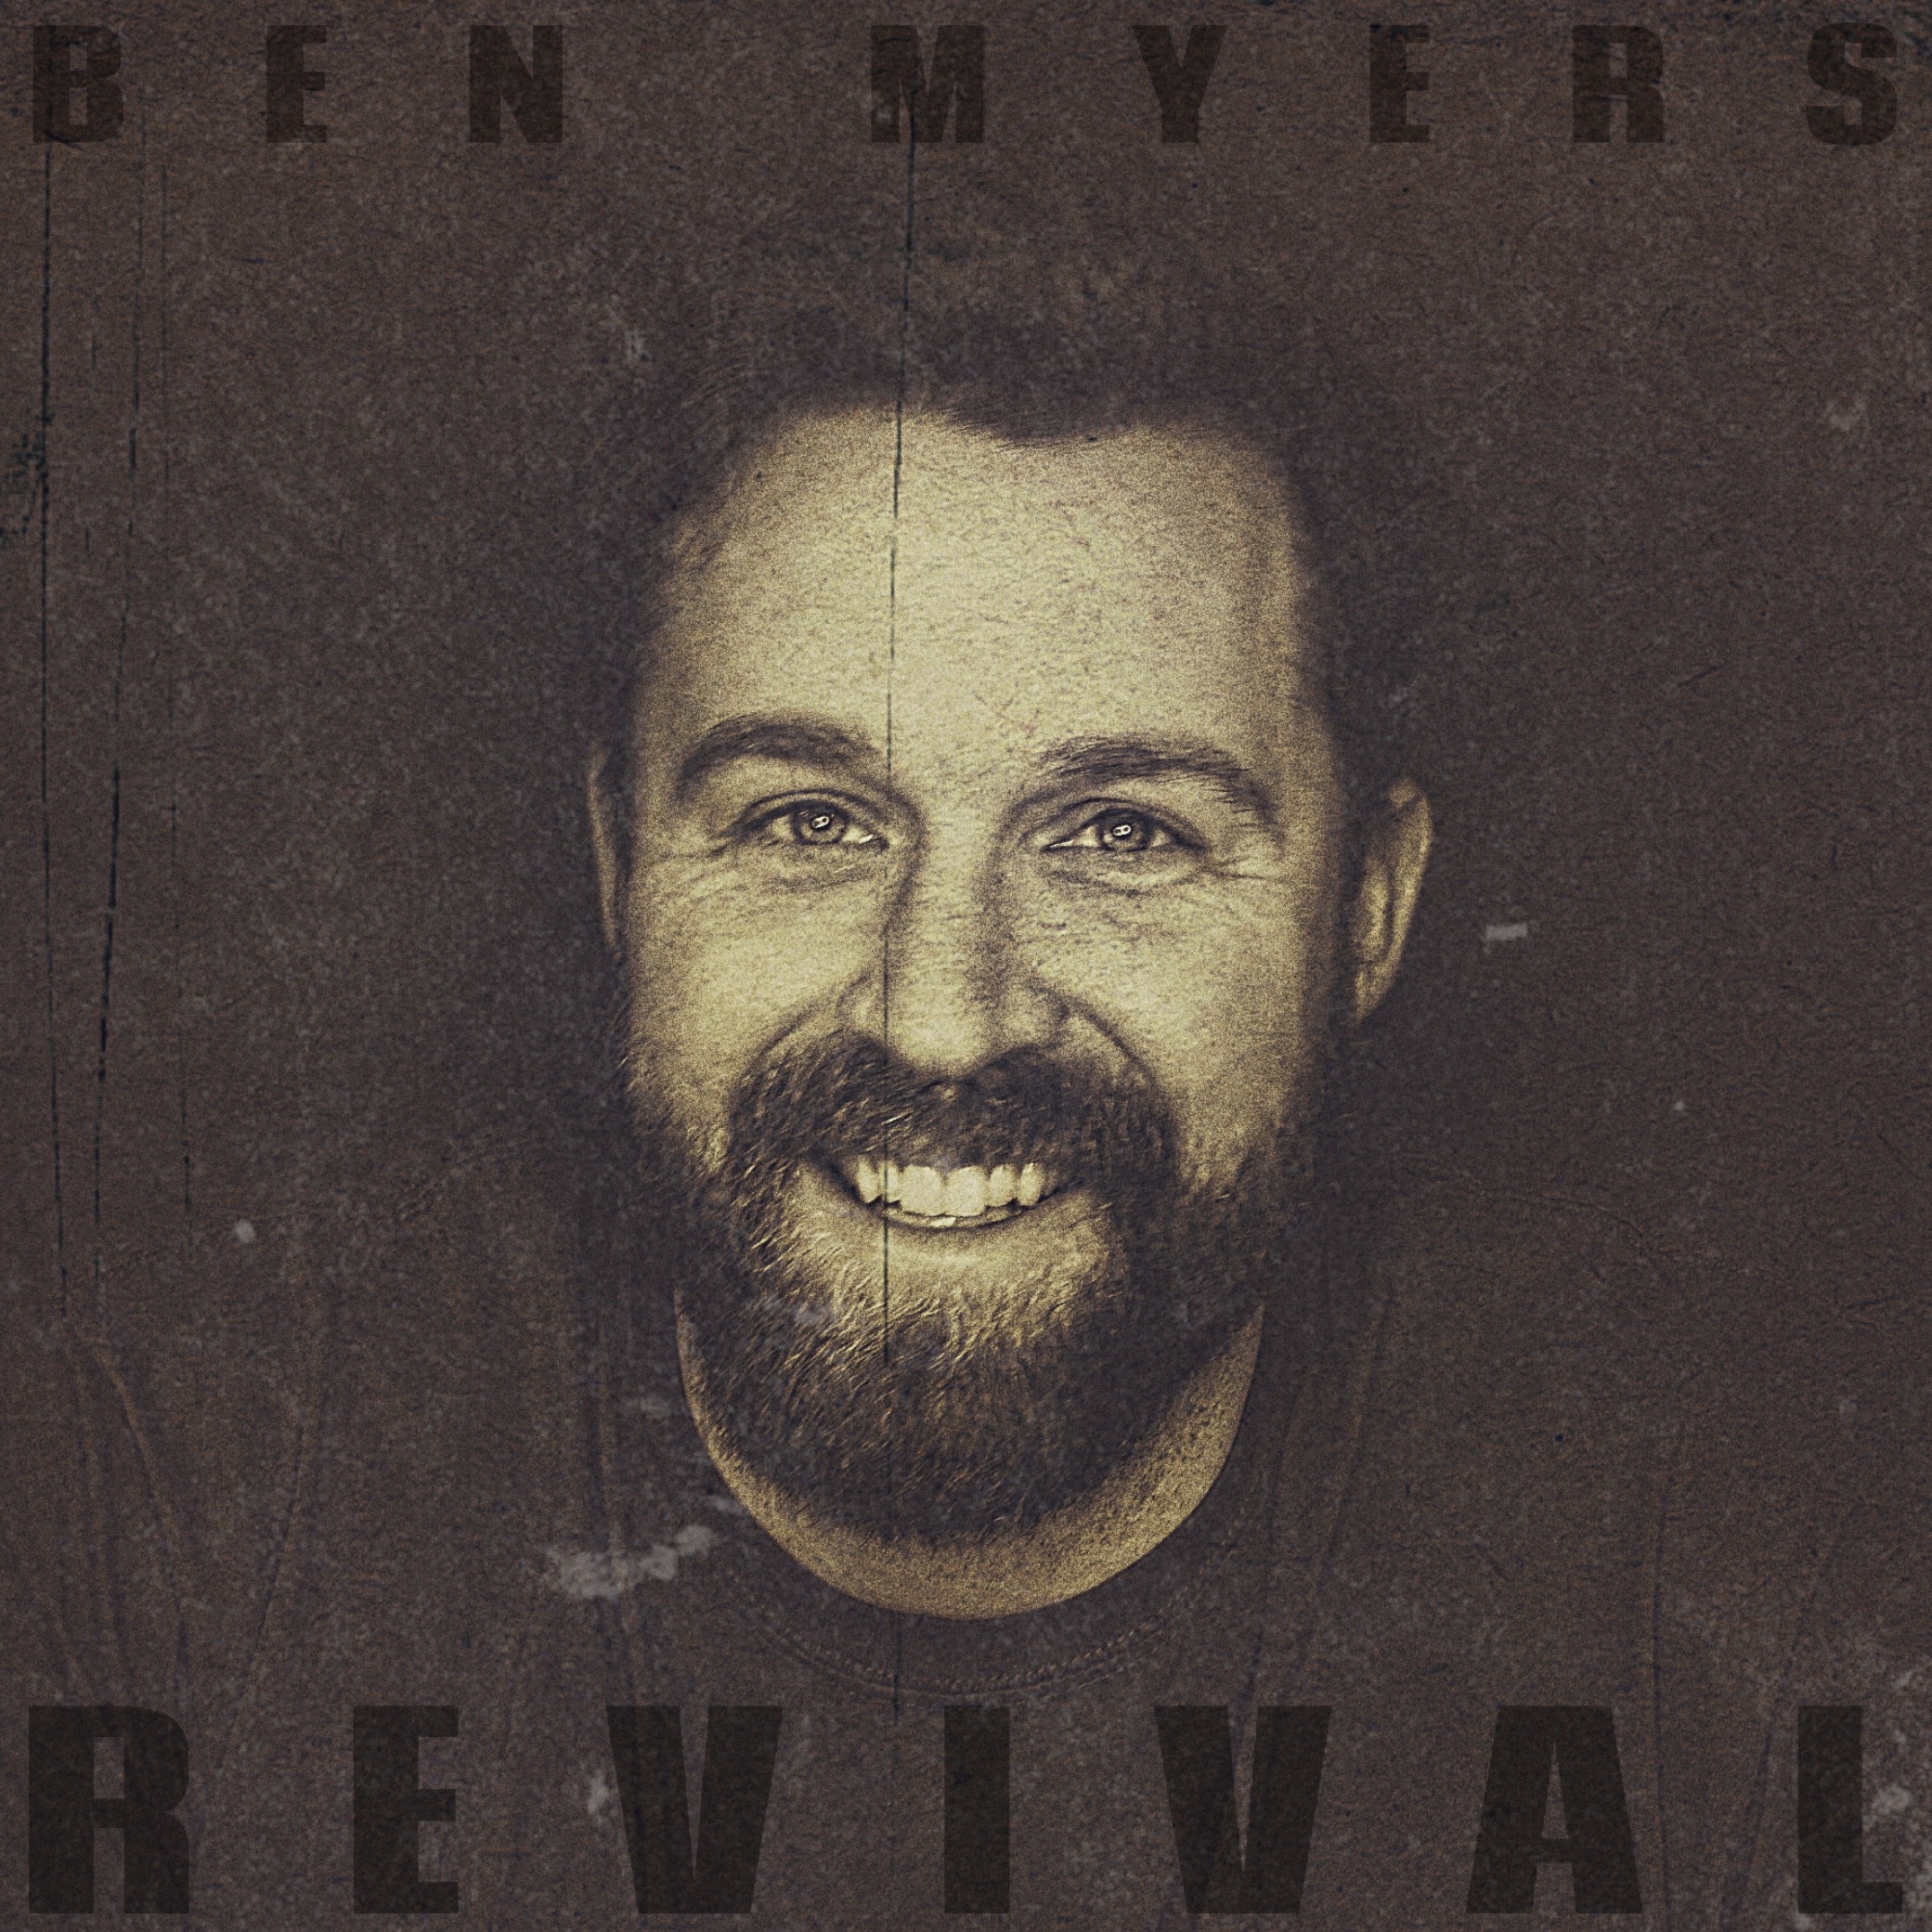 BEN MYERS RELEASES ‘REVIVAL’ TODAY